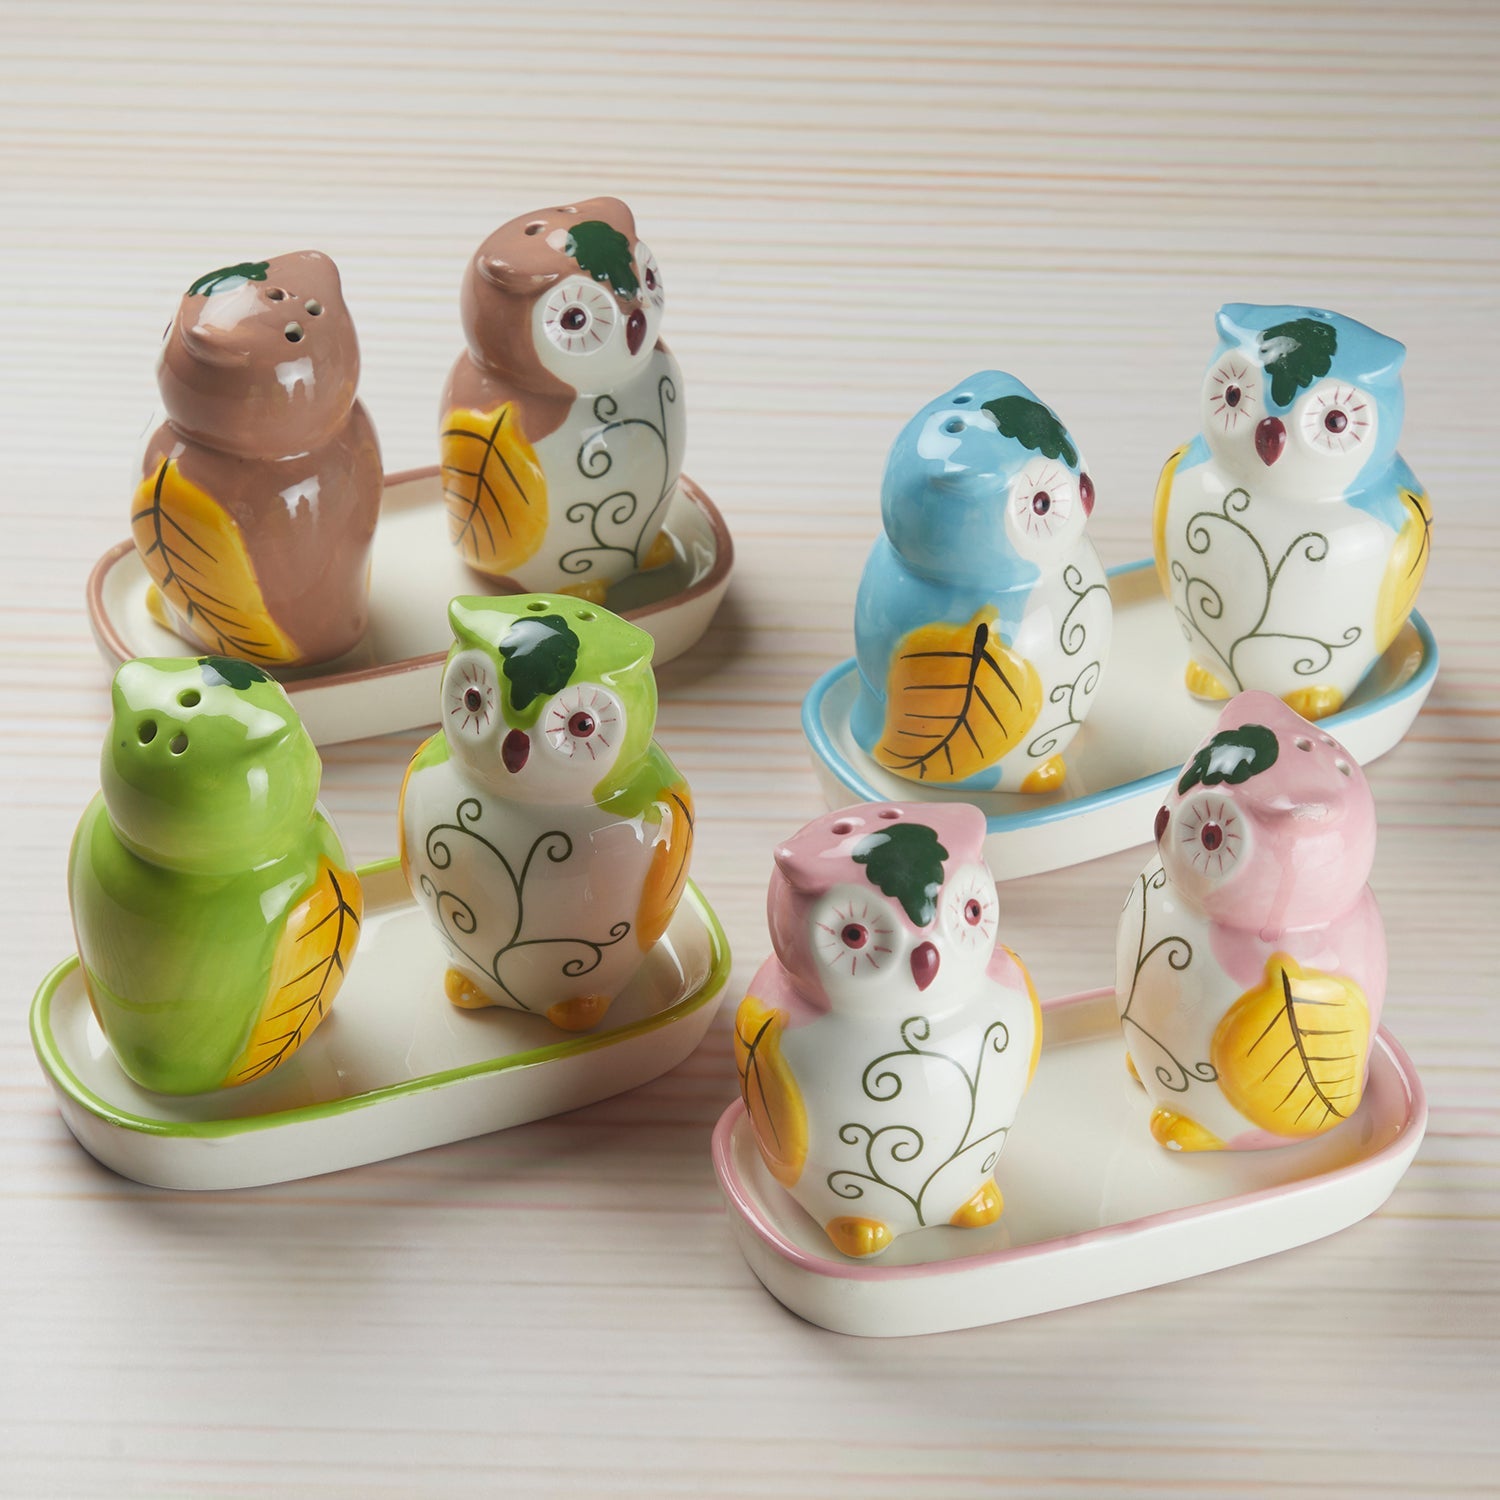 Ceramic Salt and Pepper Set with tray, Owl Design, Green (10286)